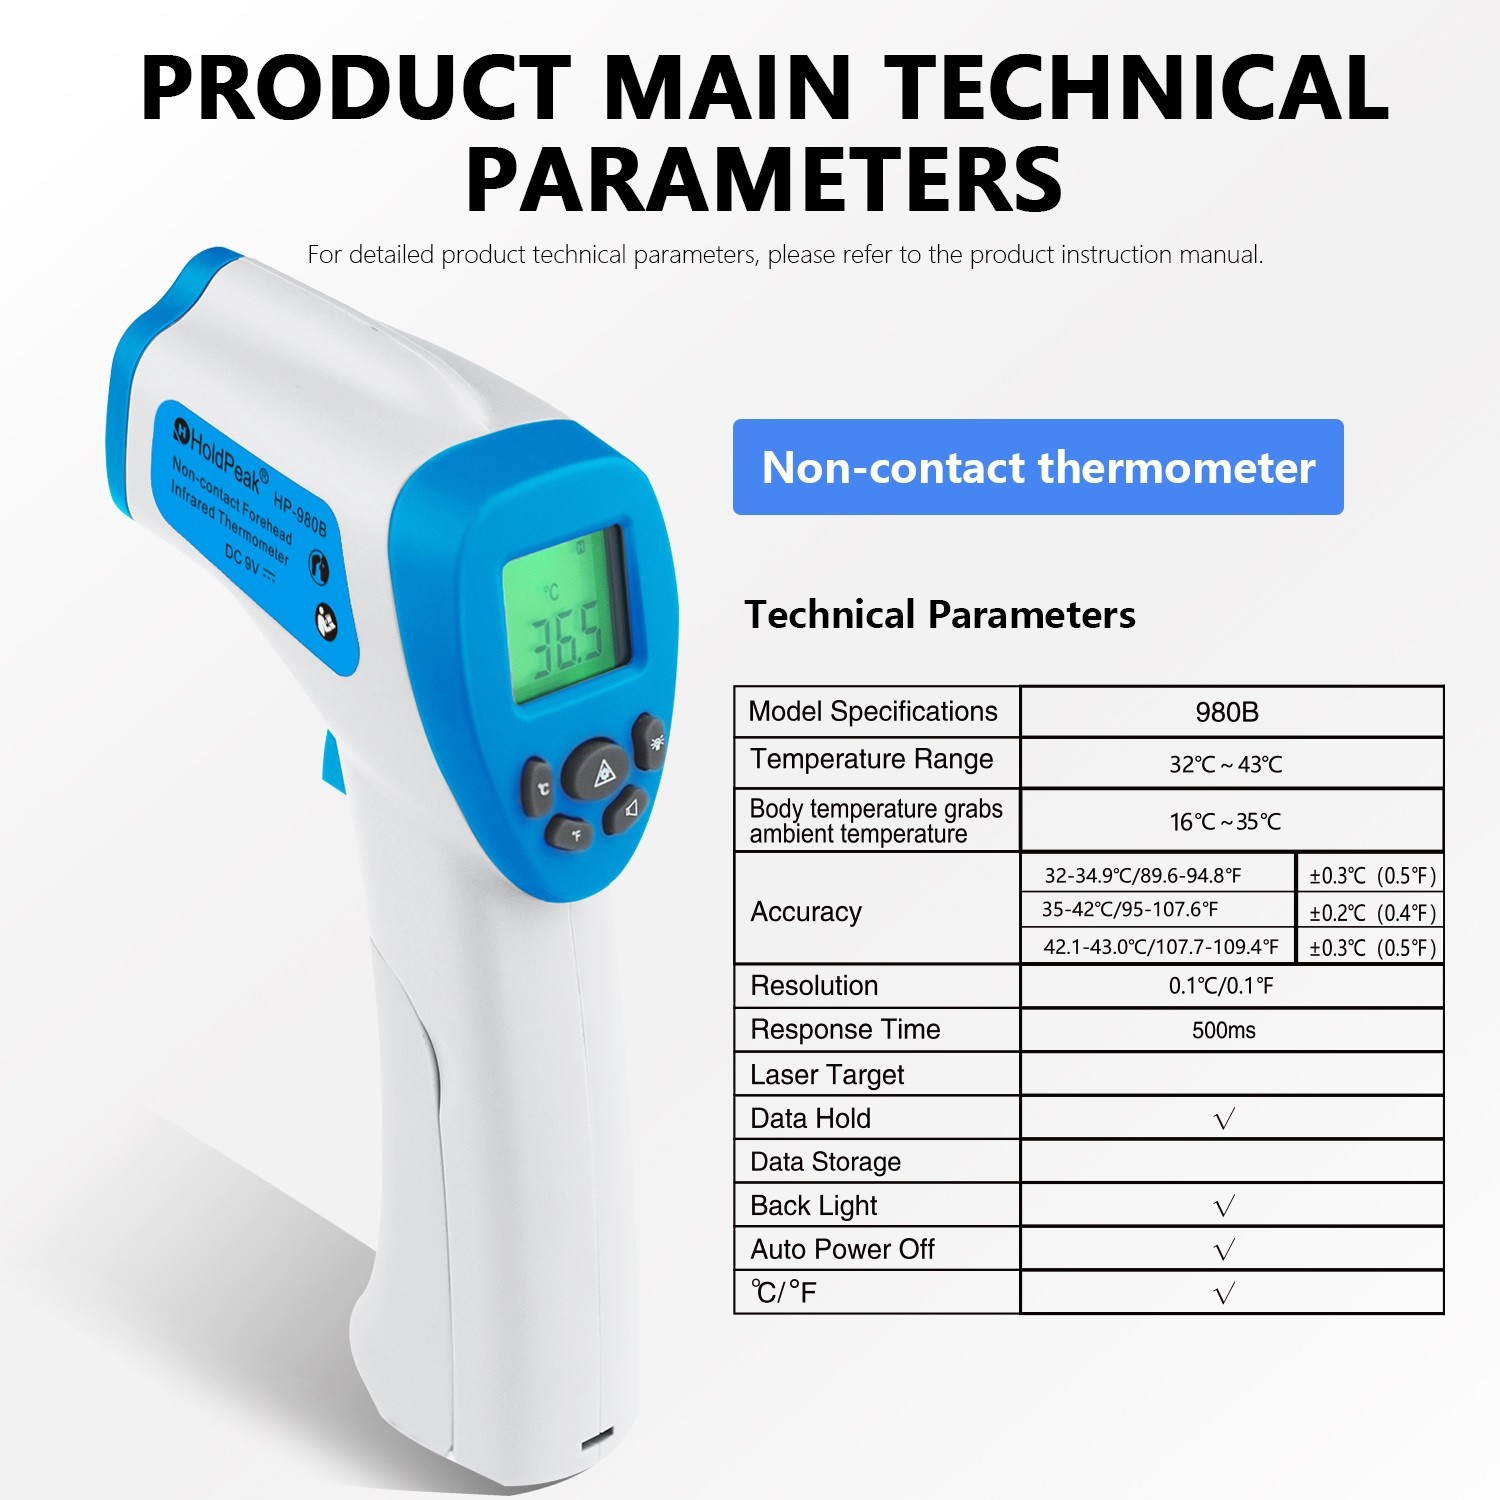 HoldPeak easy to use small infrared thermometer manufacturers for customs